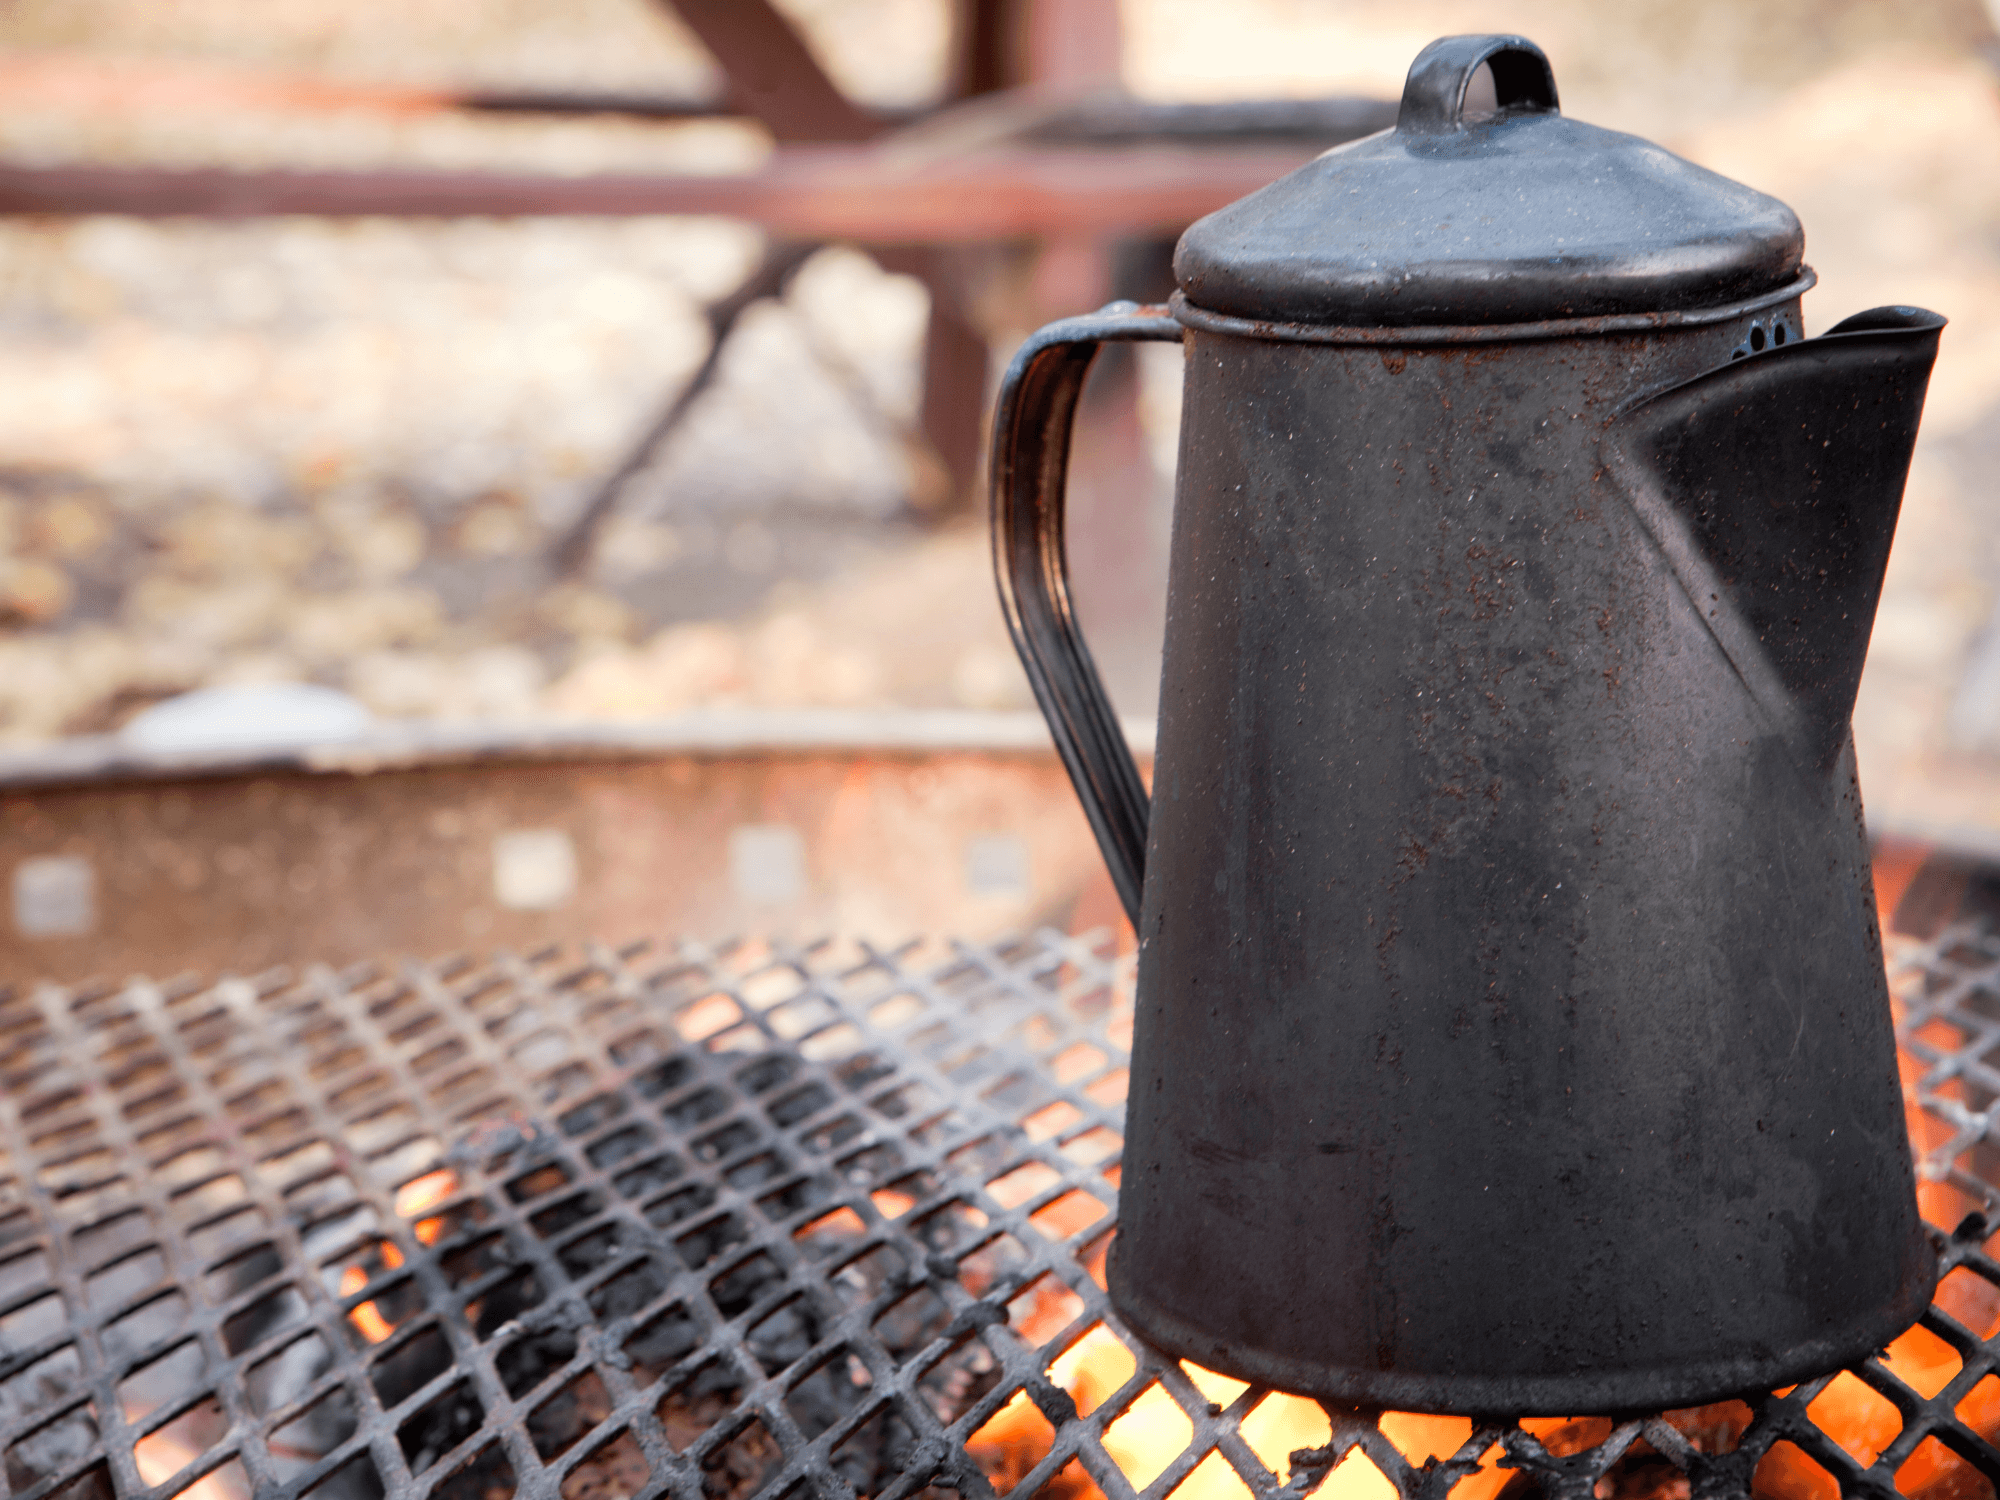 What Is Cowboy Coffee And How Do You Make It?